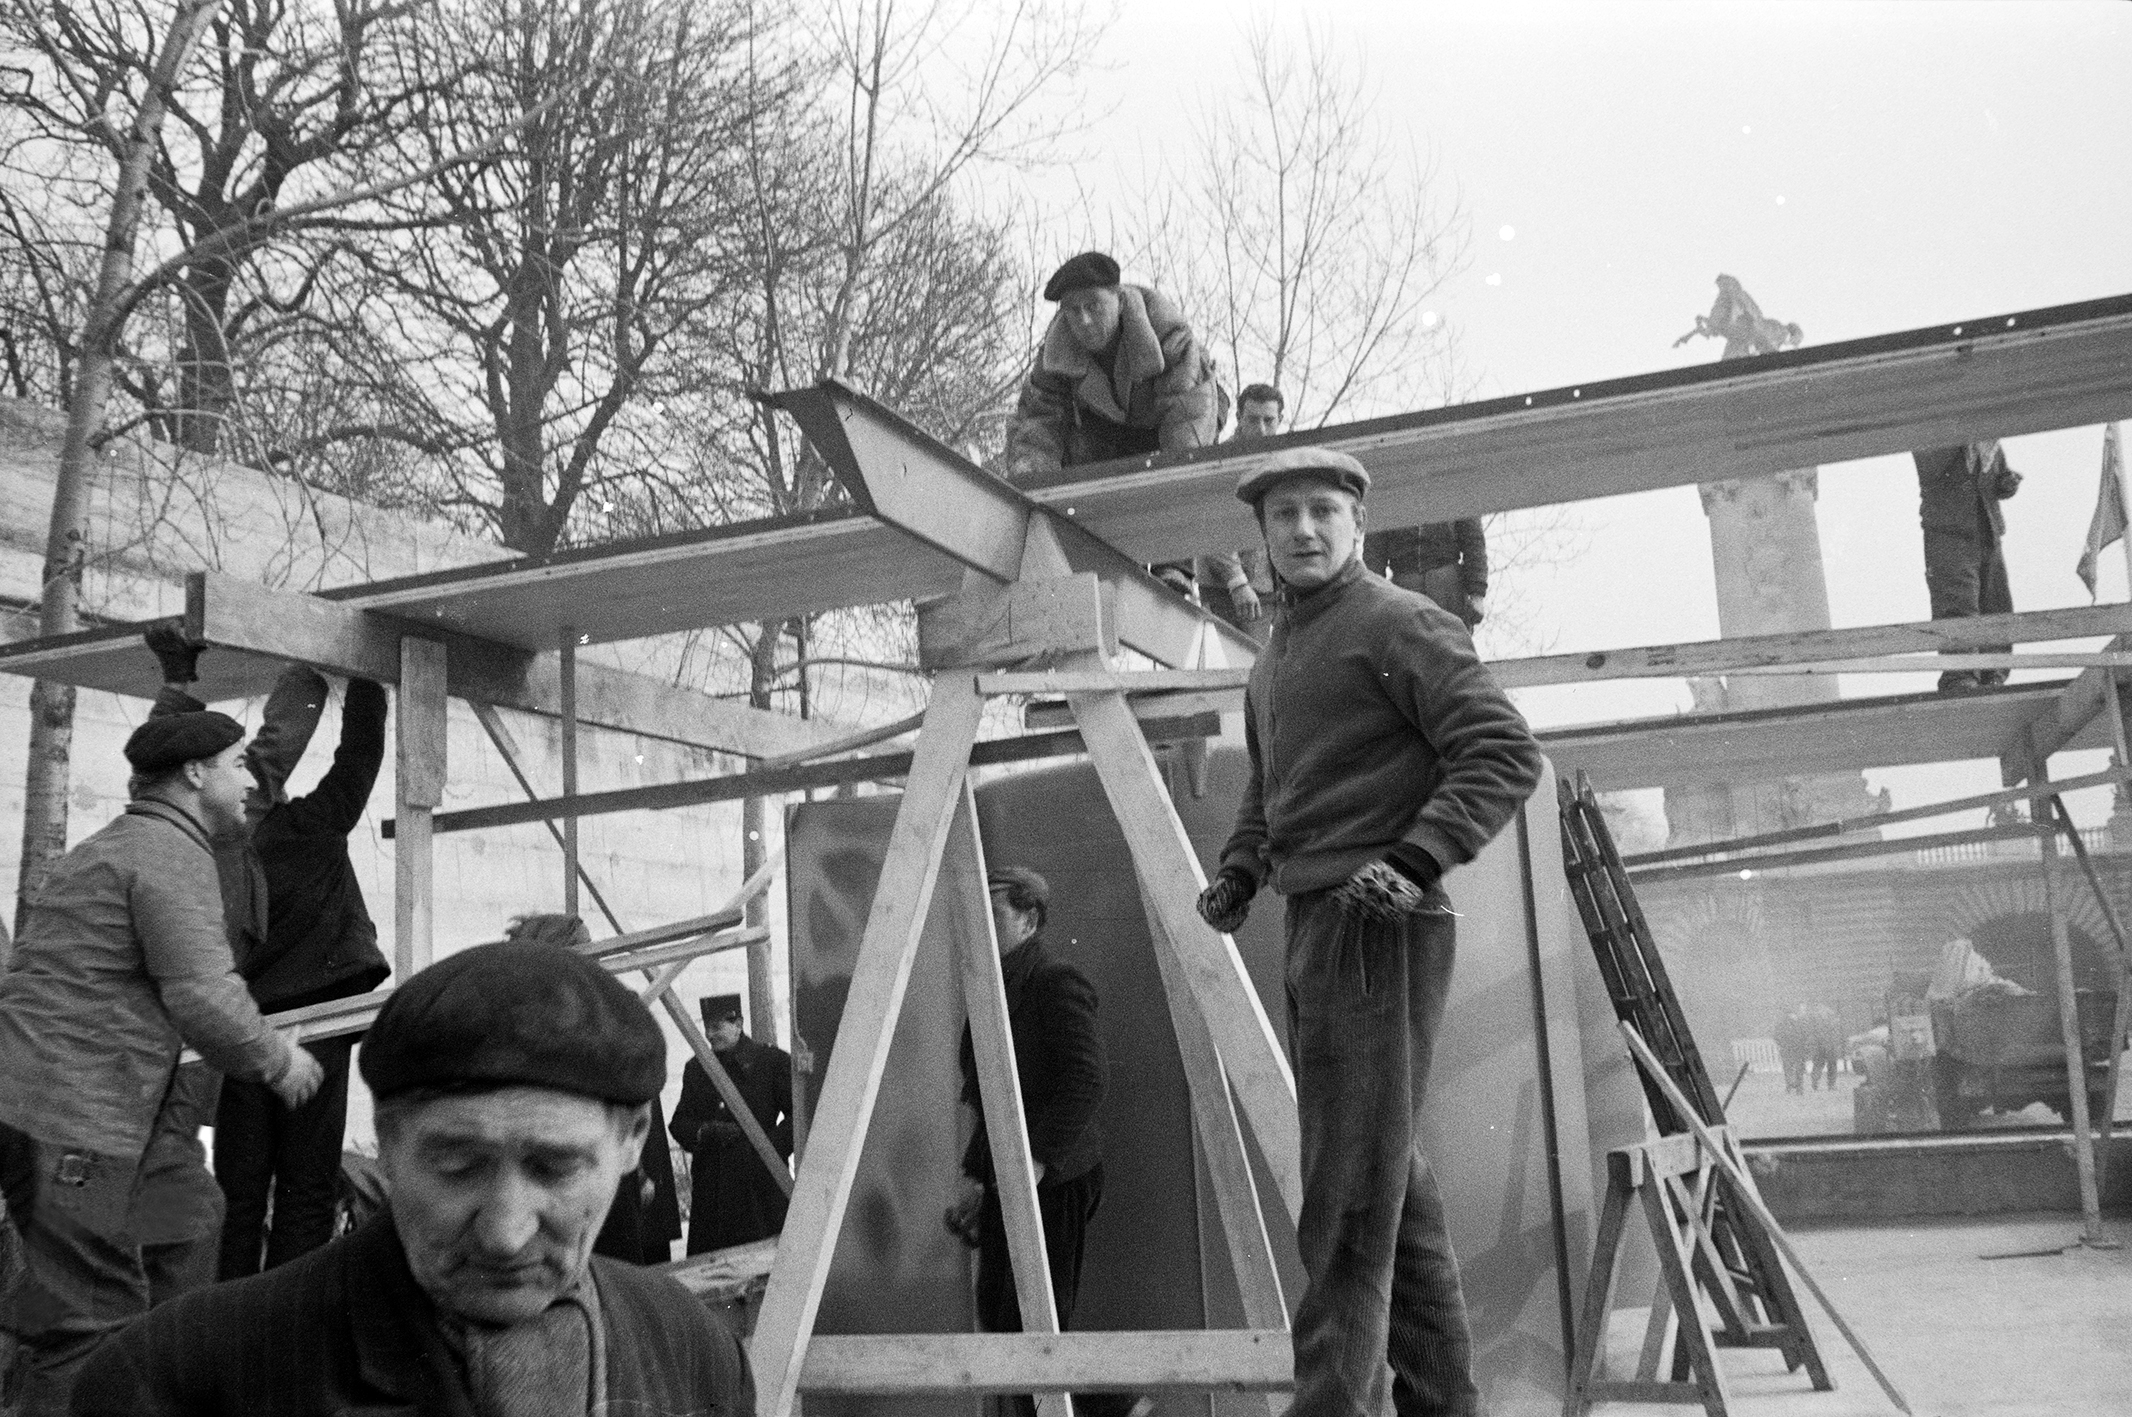 Les Jours Meilleurs demountable house. Installing the wooden panels for the roof and ceiling, Quai Alexandre-III, Paris, February 1956.